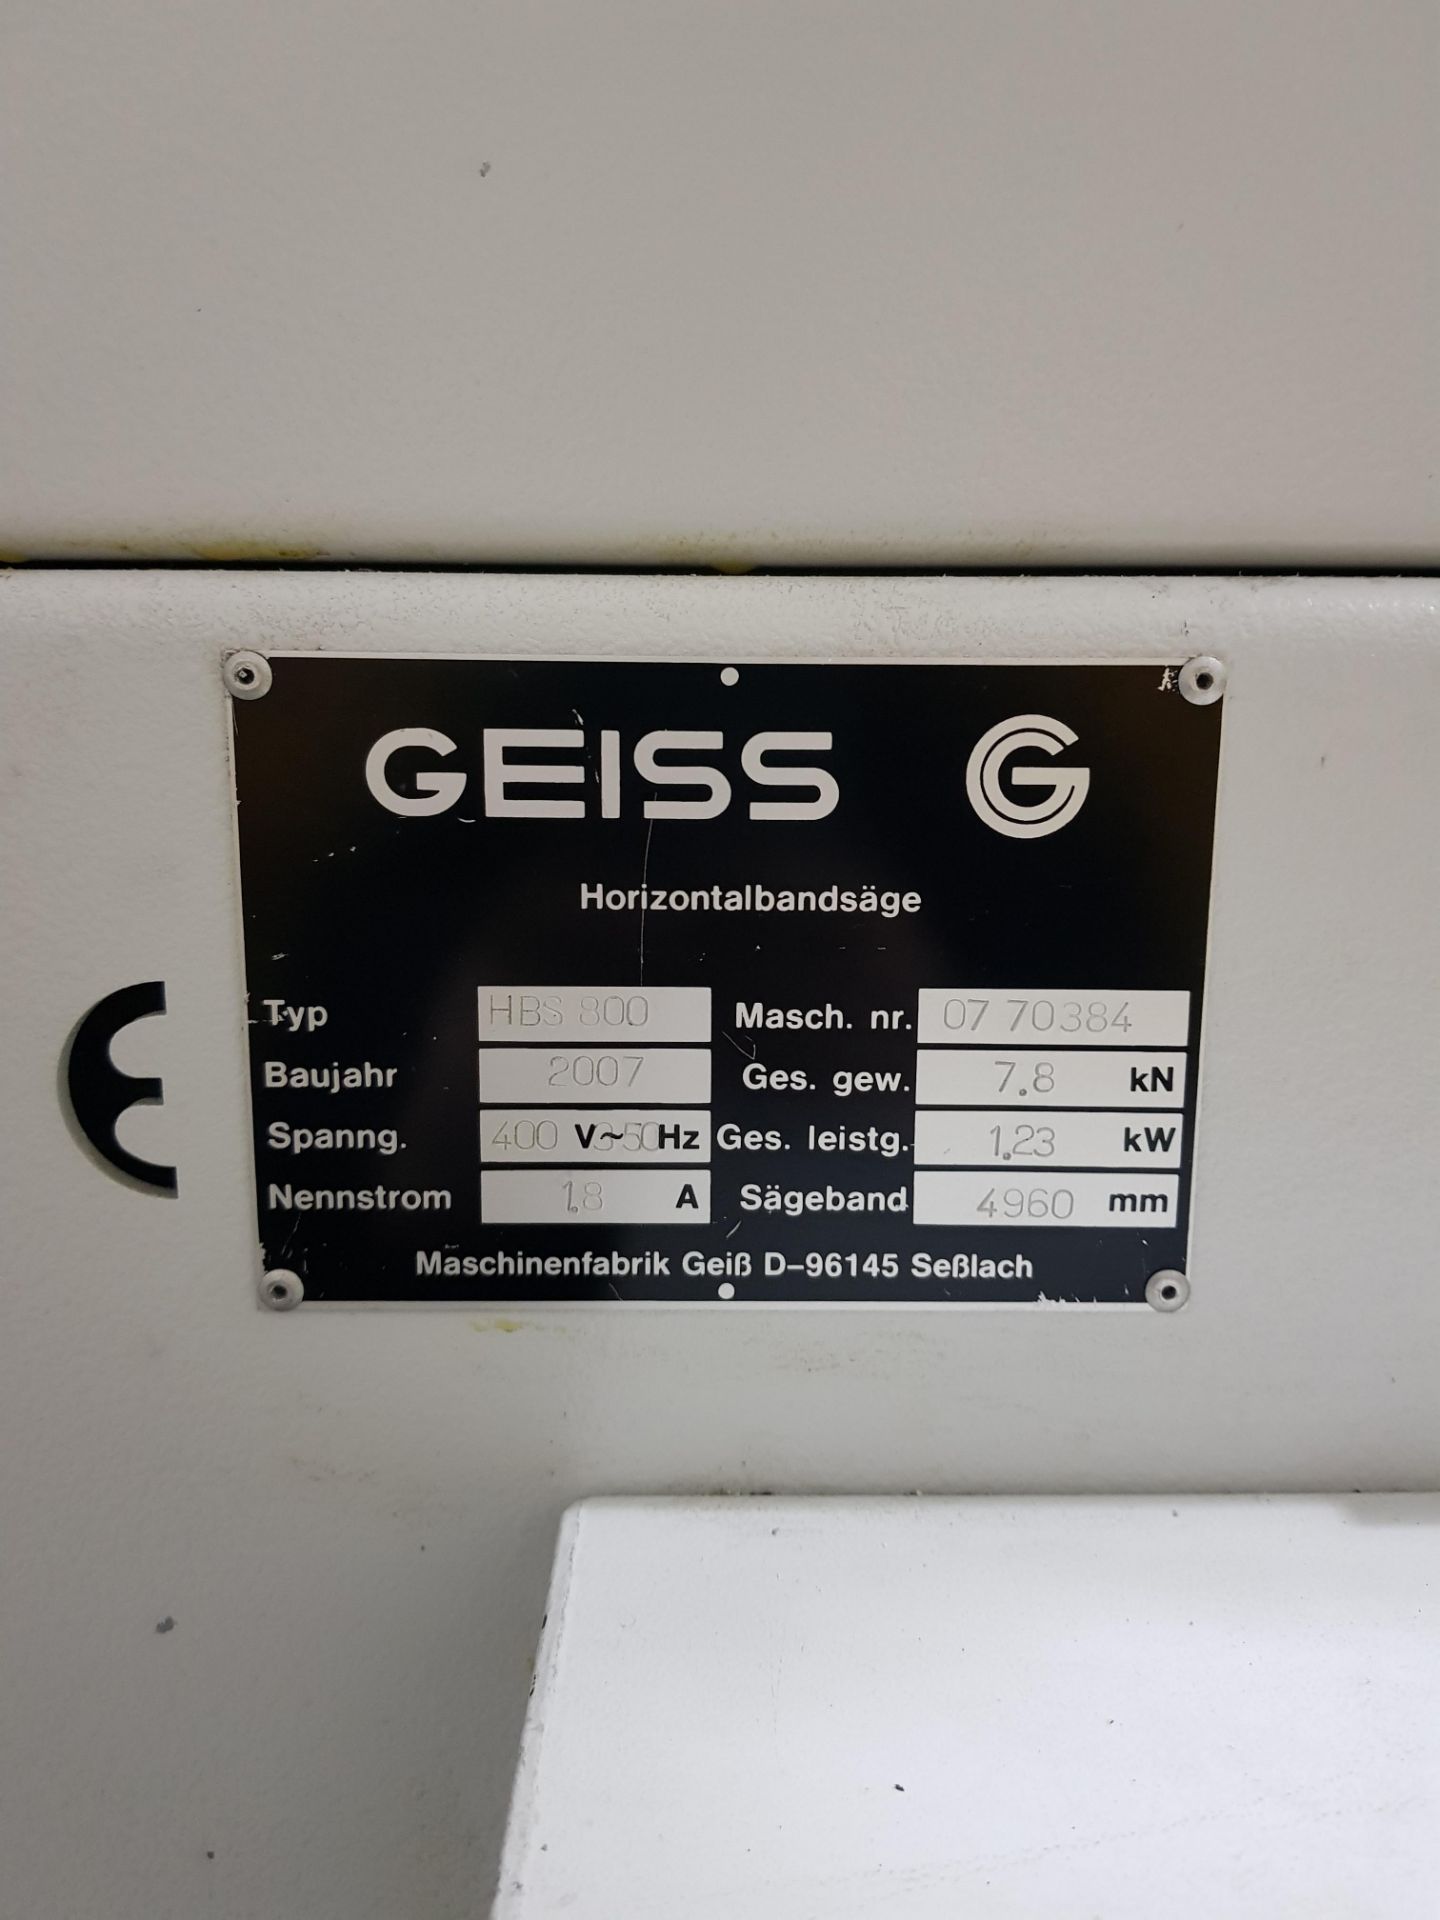 GEISS HBS 800 HORIZONTAL BAND SAW, GUIDED AUTO FEED, ENDLESS CONVEYOR TRANSPORT BELT, 4960MM - Image 3 of 5